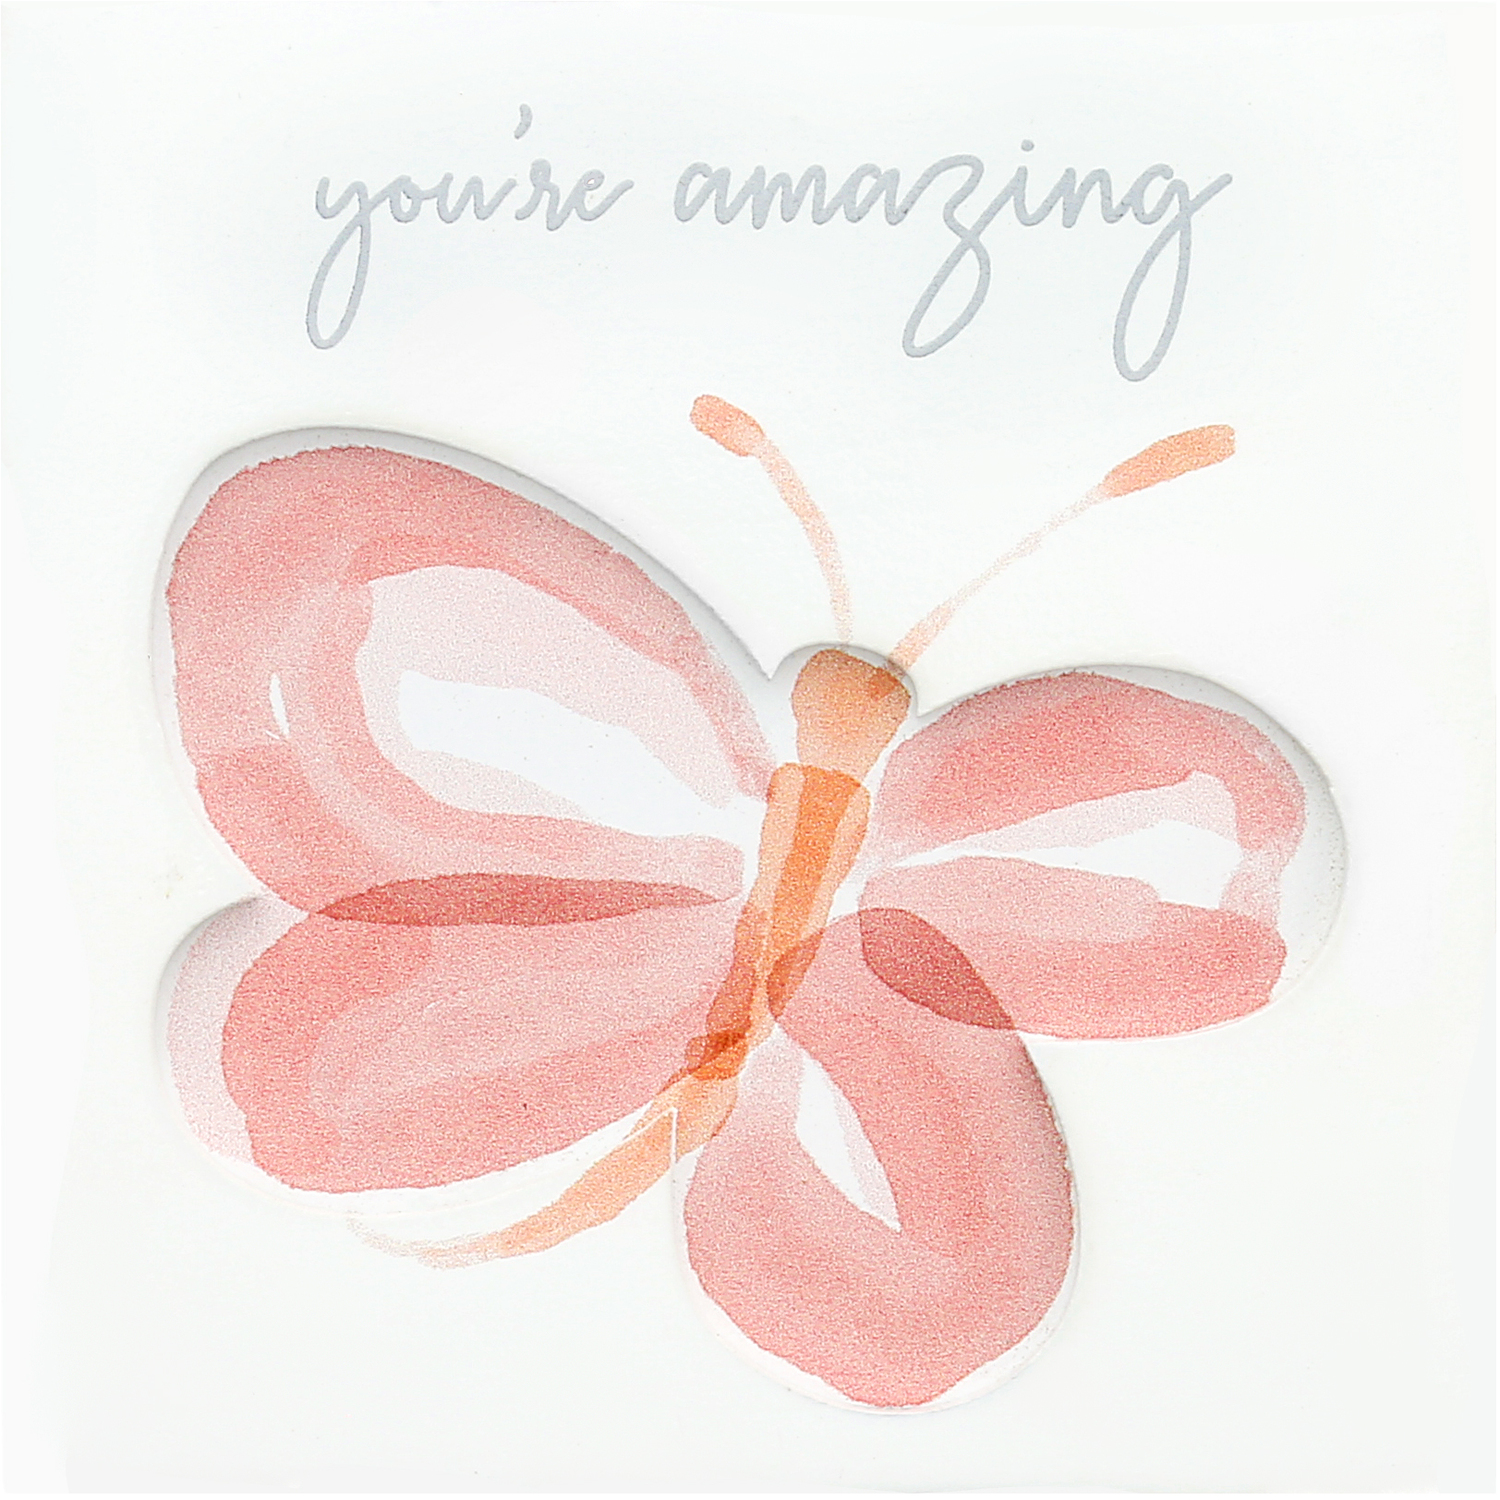 You're Amazing by Rosy Heart - You're Amazing - 4.5" Layered Plaque